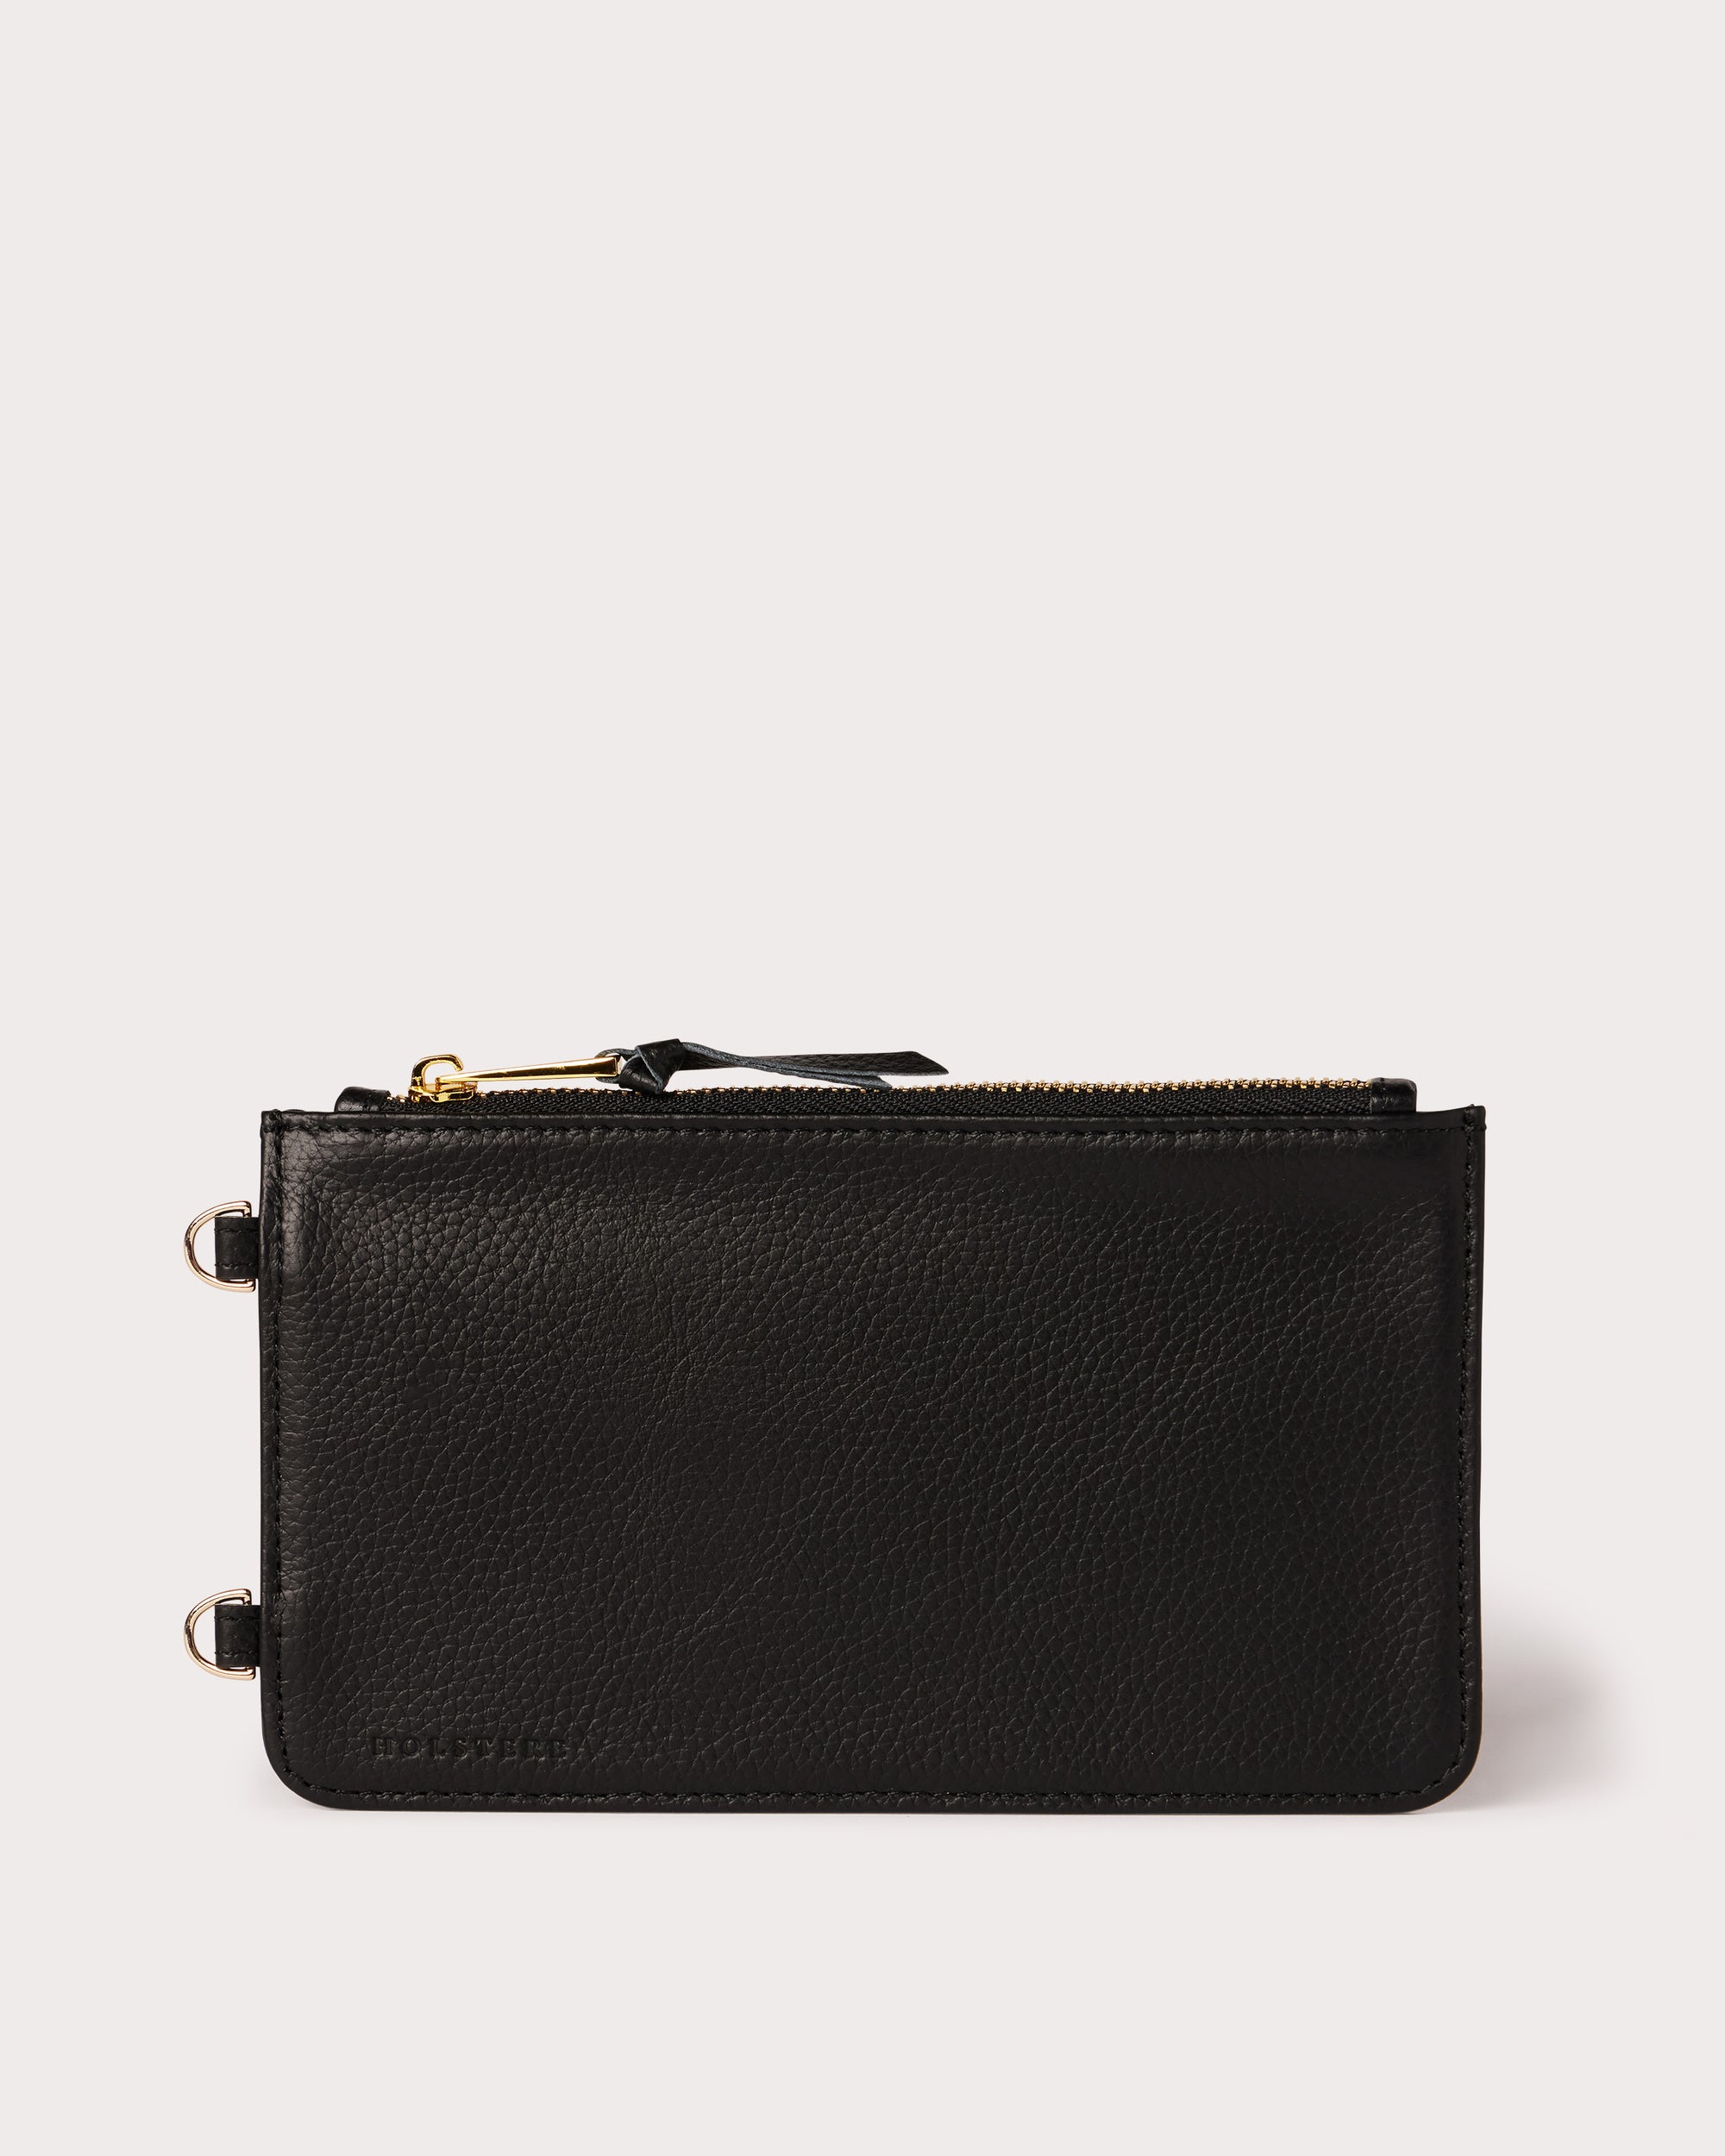 Buy Radley Black Small Ziptop Coin Purse from the Next UK online shop